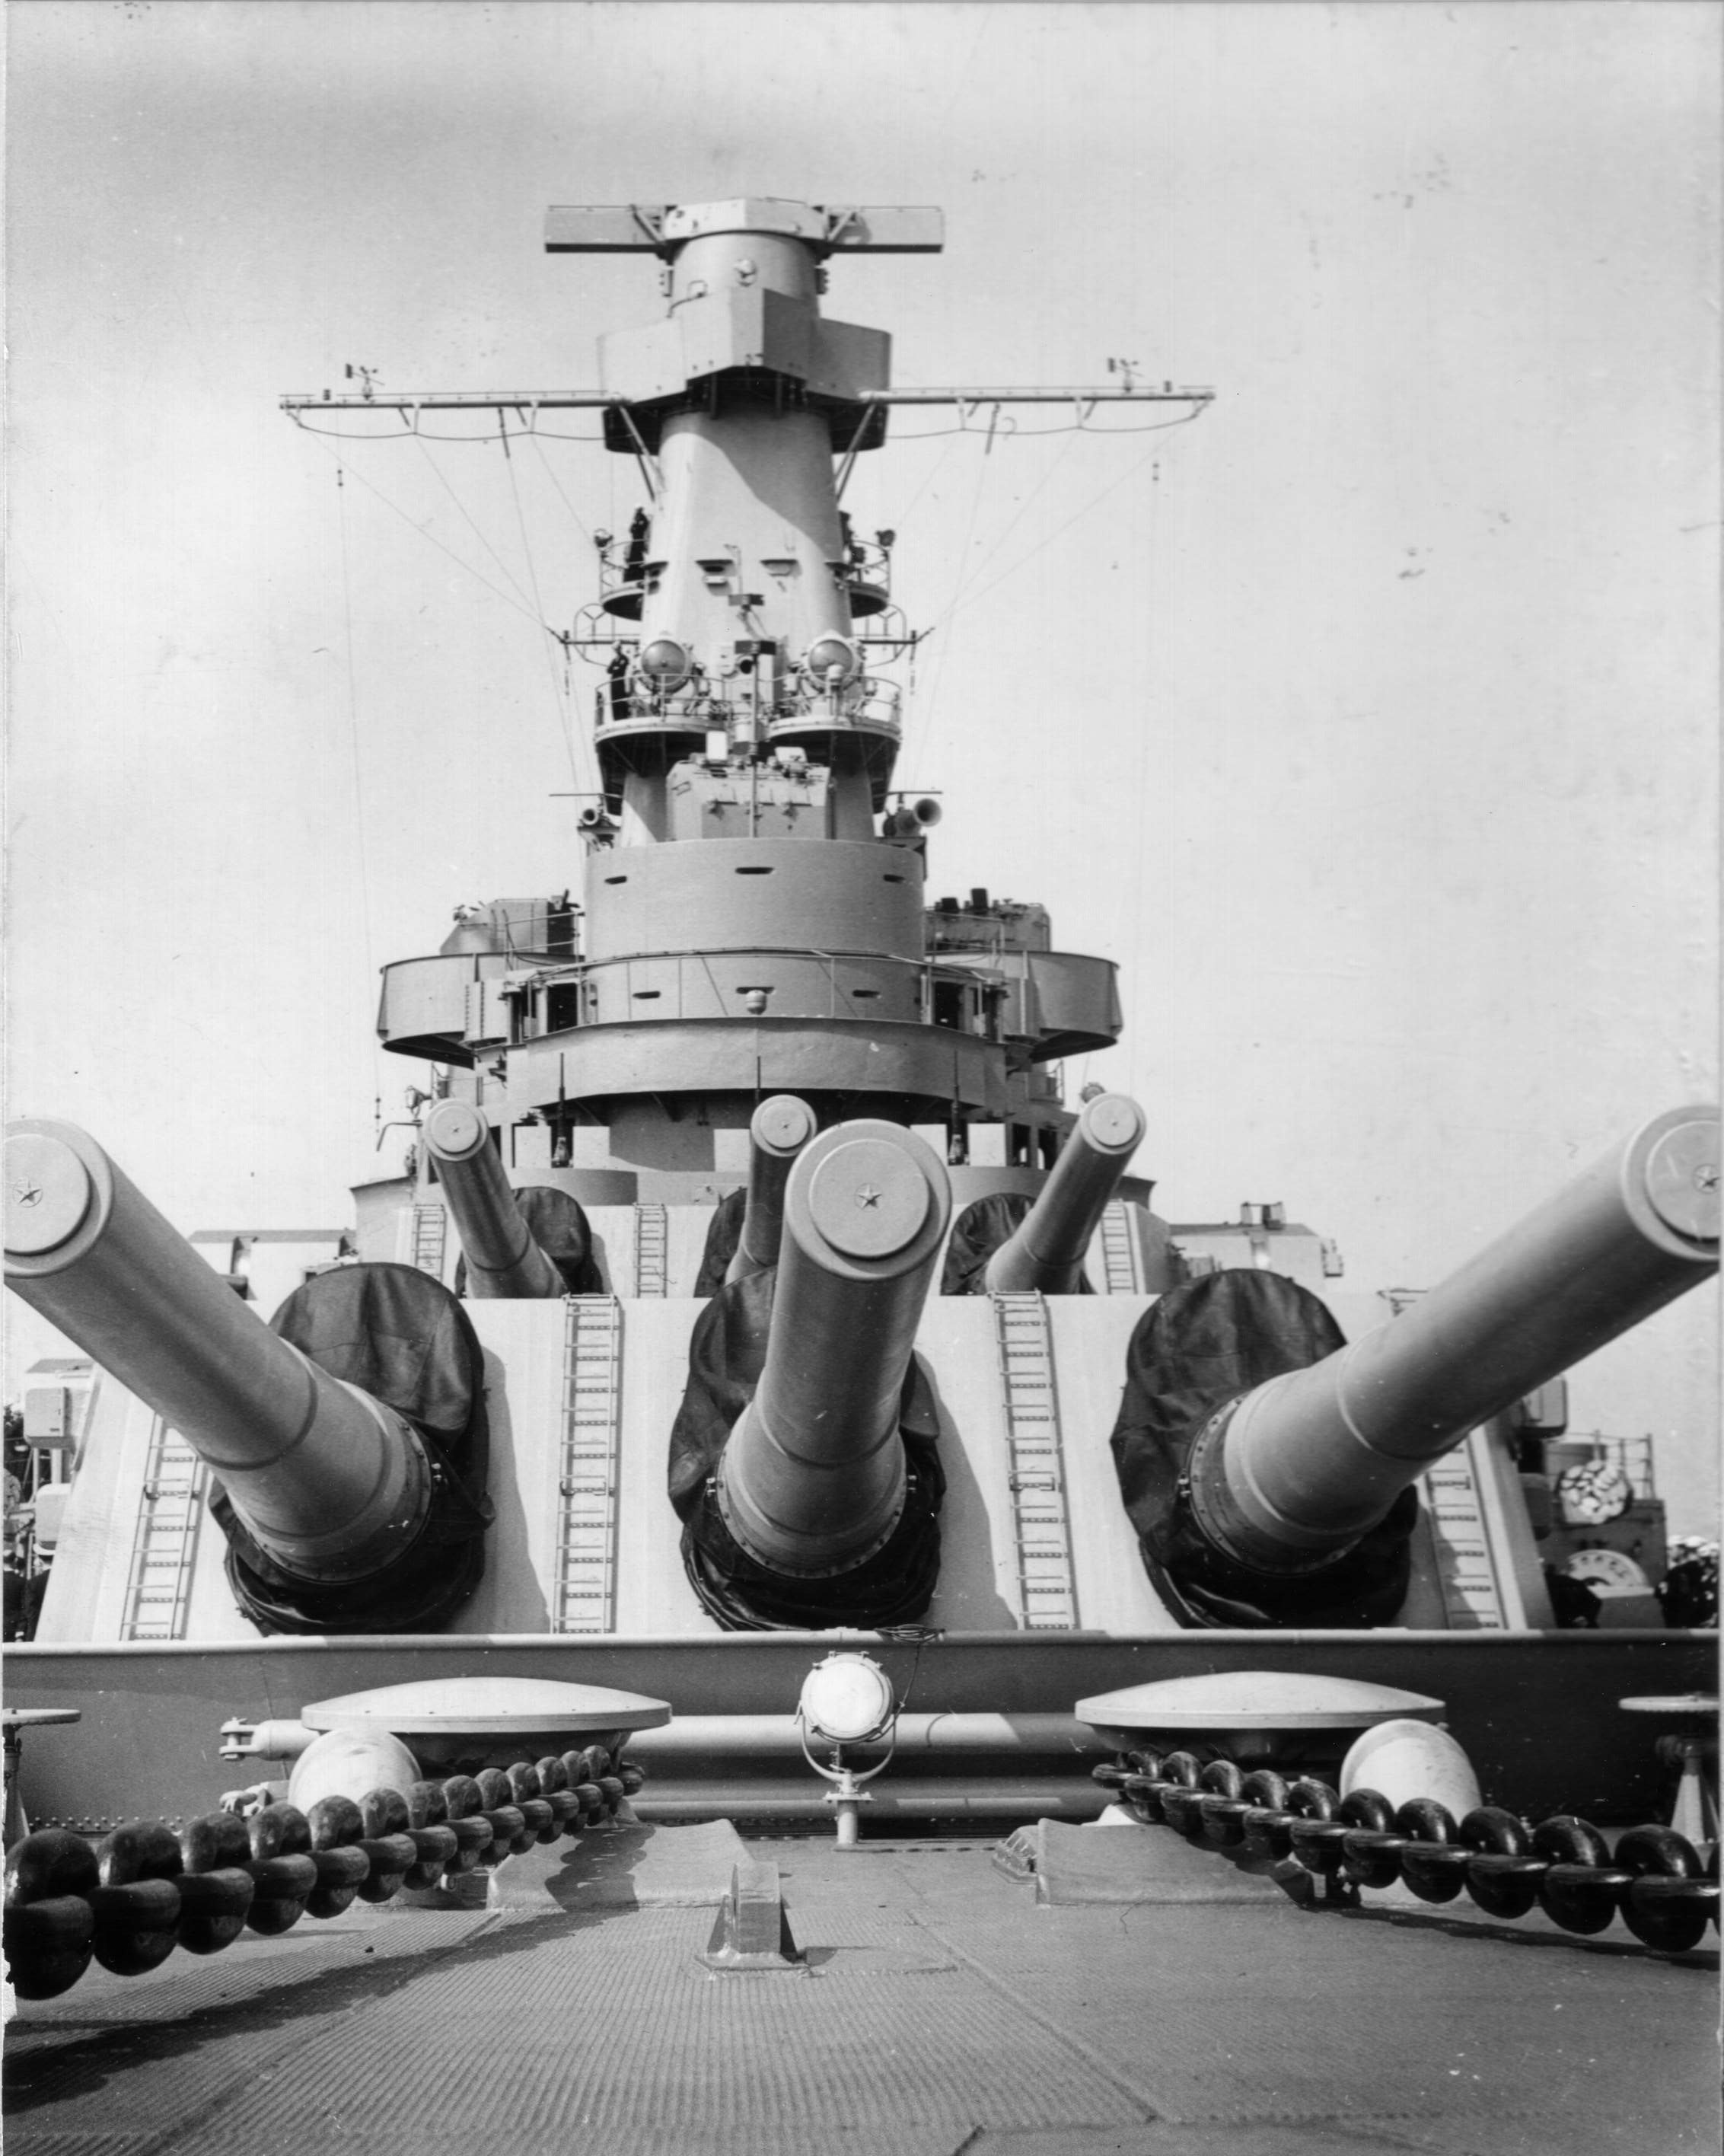 View of battleship Indiana's forward 16-in guns while she was at Newport News, Virginia, United States, 30 Apr 1942